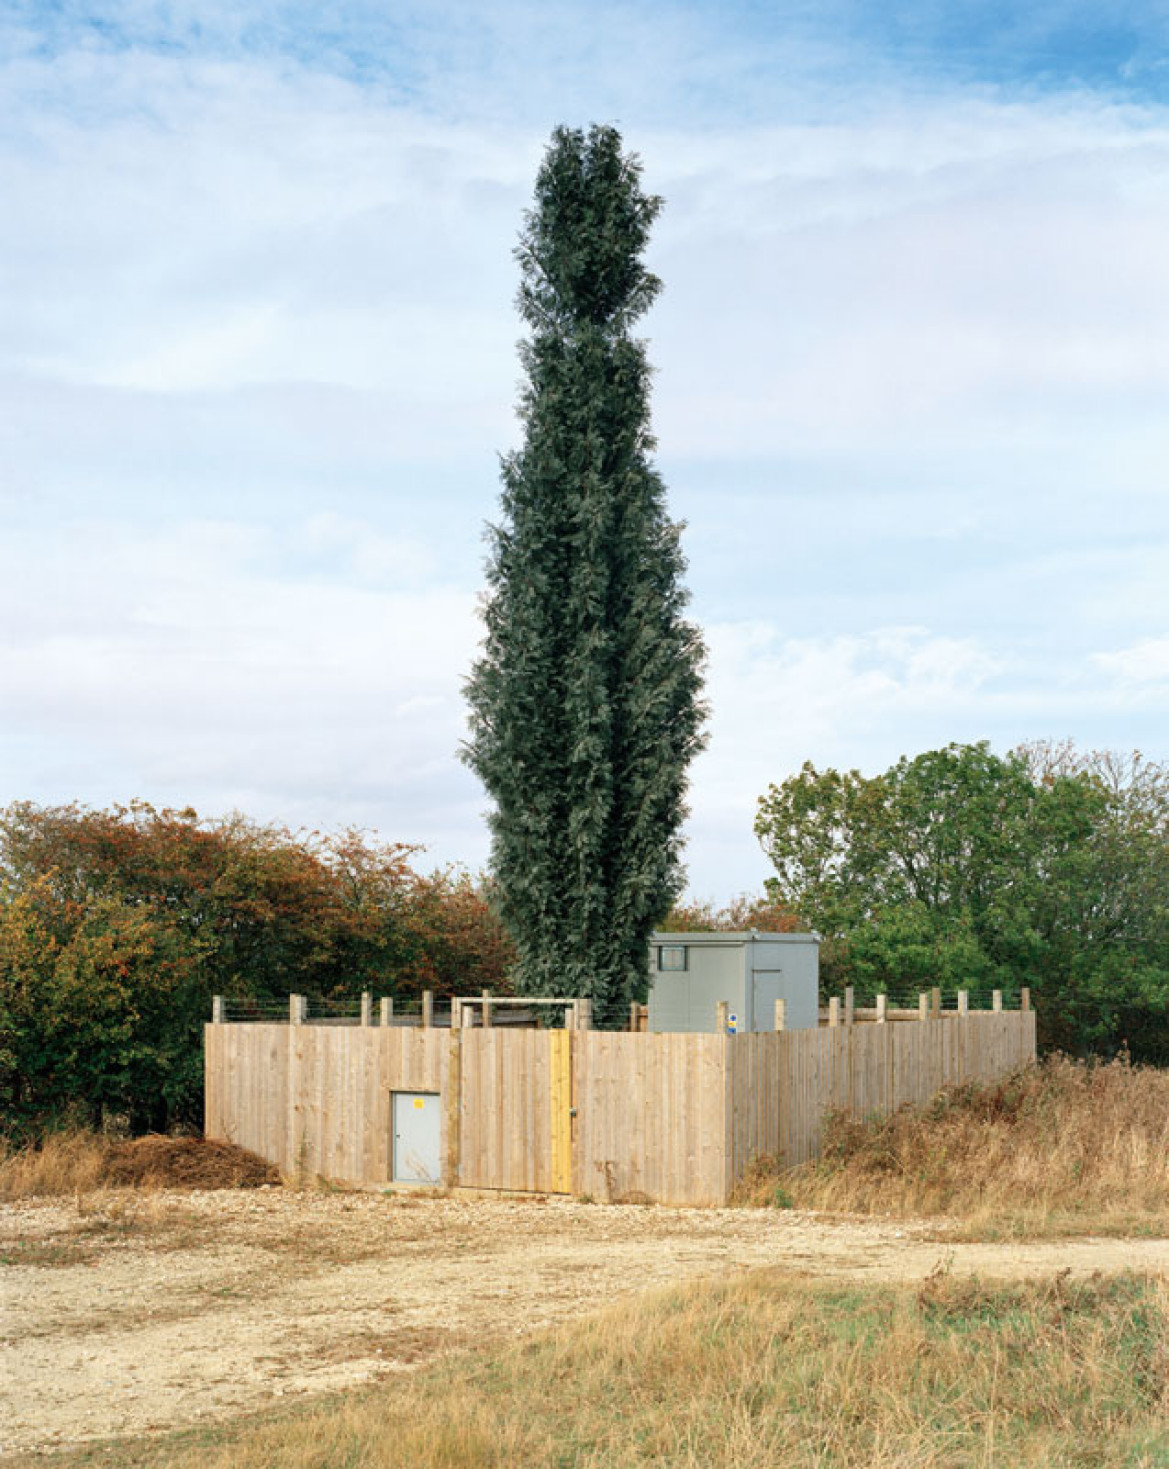 Riseley, Bedfordshire, UK, 2004 (c) 2014 Robert Voit for the images, book published by Steidl